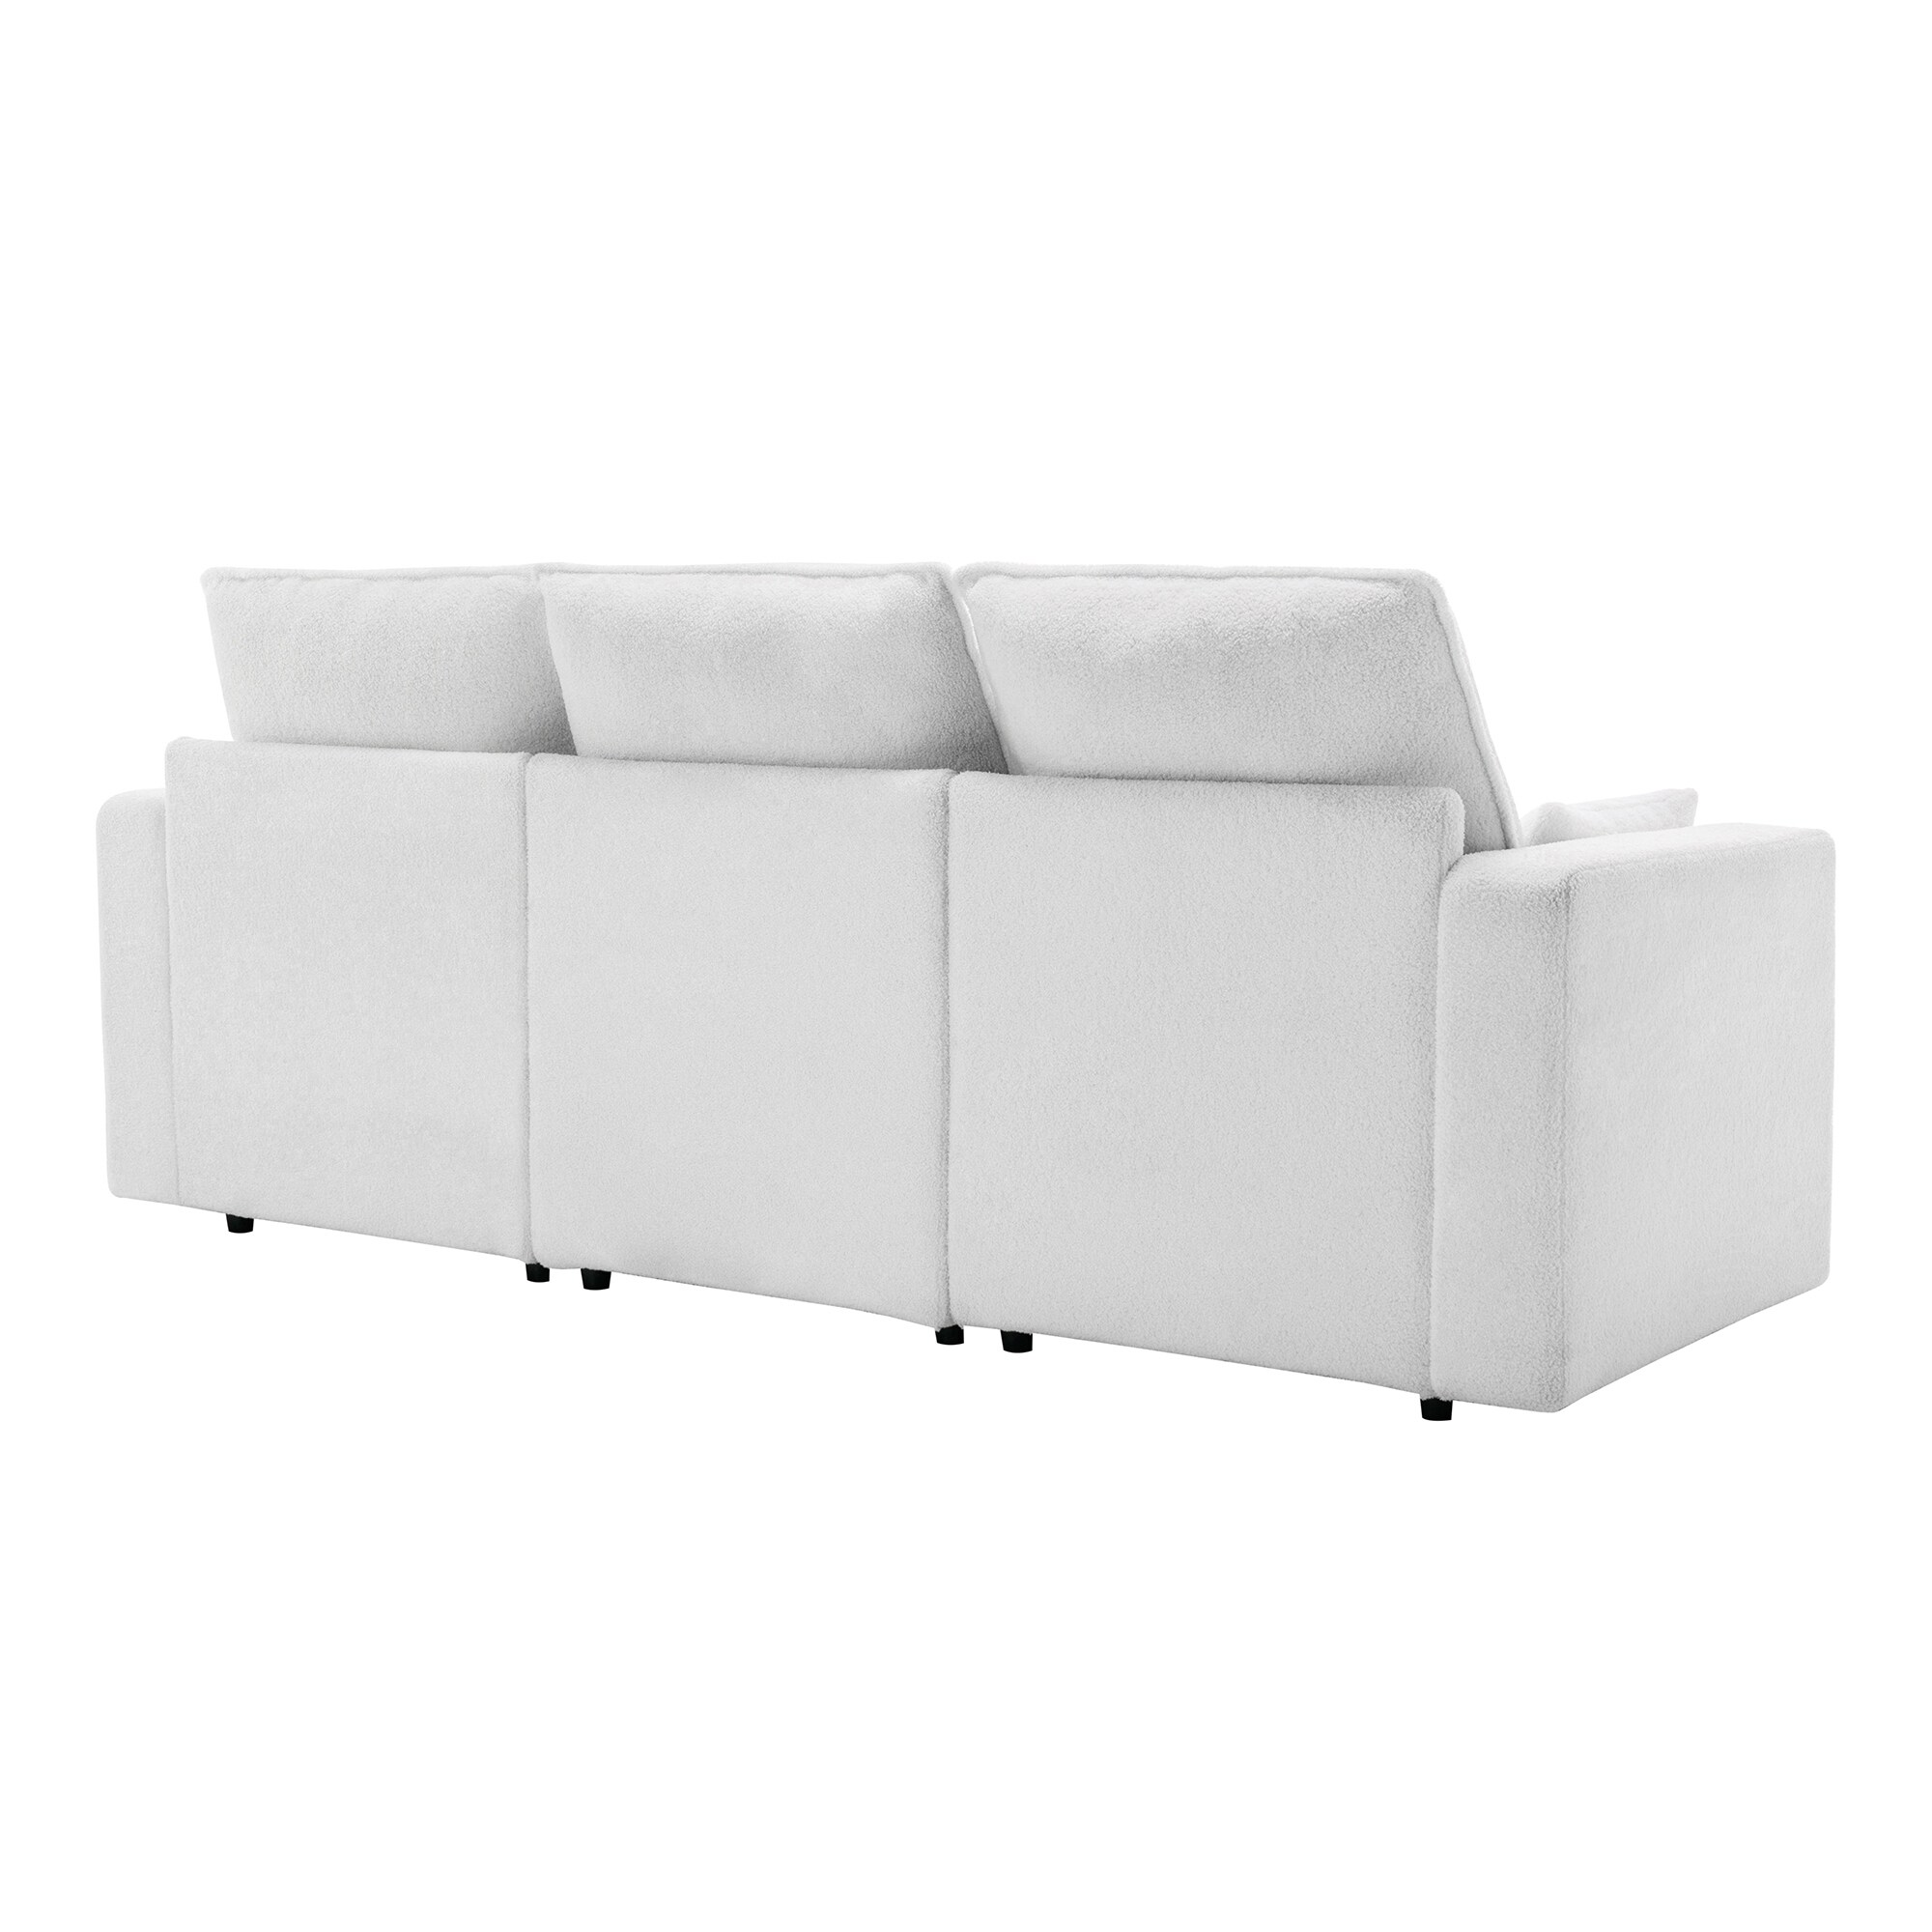 https://ak1.ostkcdn.com/images/products/is/images/direct/29d292277515d3df0233e0504f14a69df9cf5d84/3-Seat-Sofa-with-Removable-Back-and-Seat-Cushions-and-2-pillows.jpg